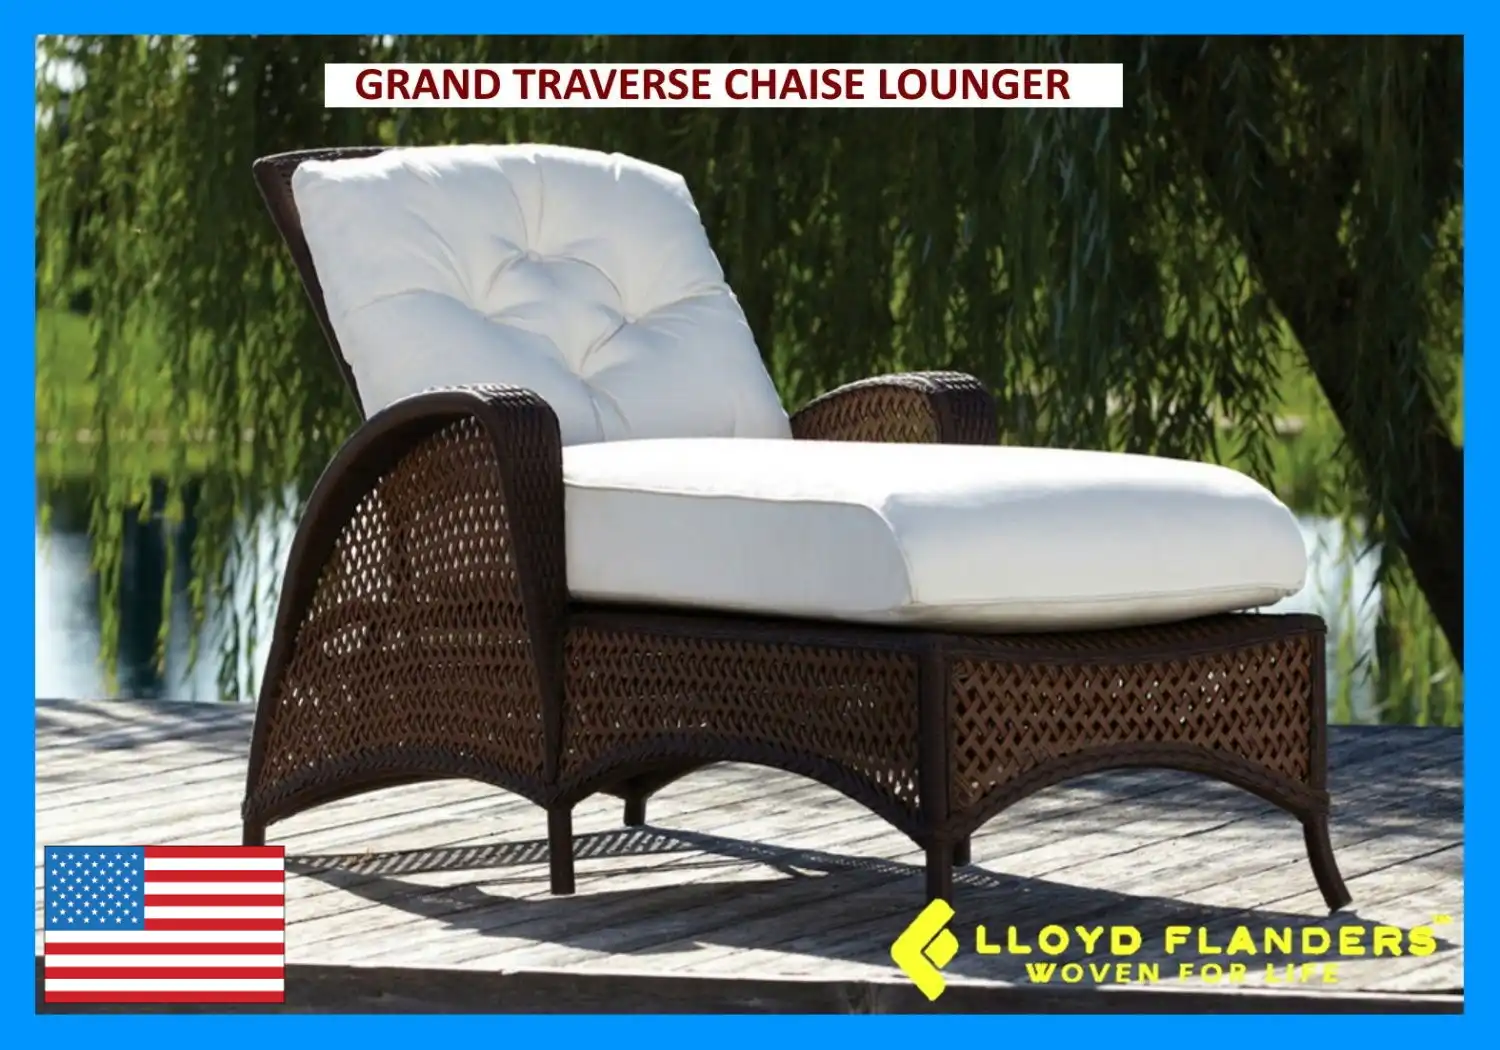 GRAND TRAVERSE CHAISE LOUNGER